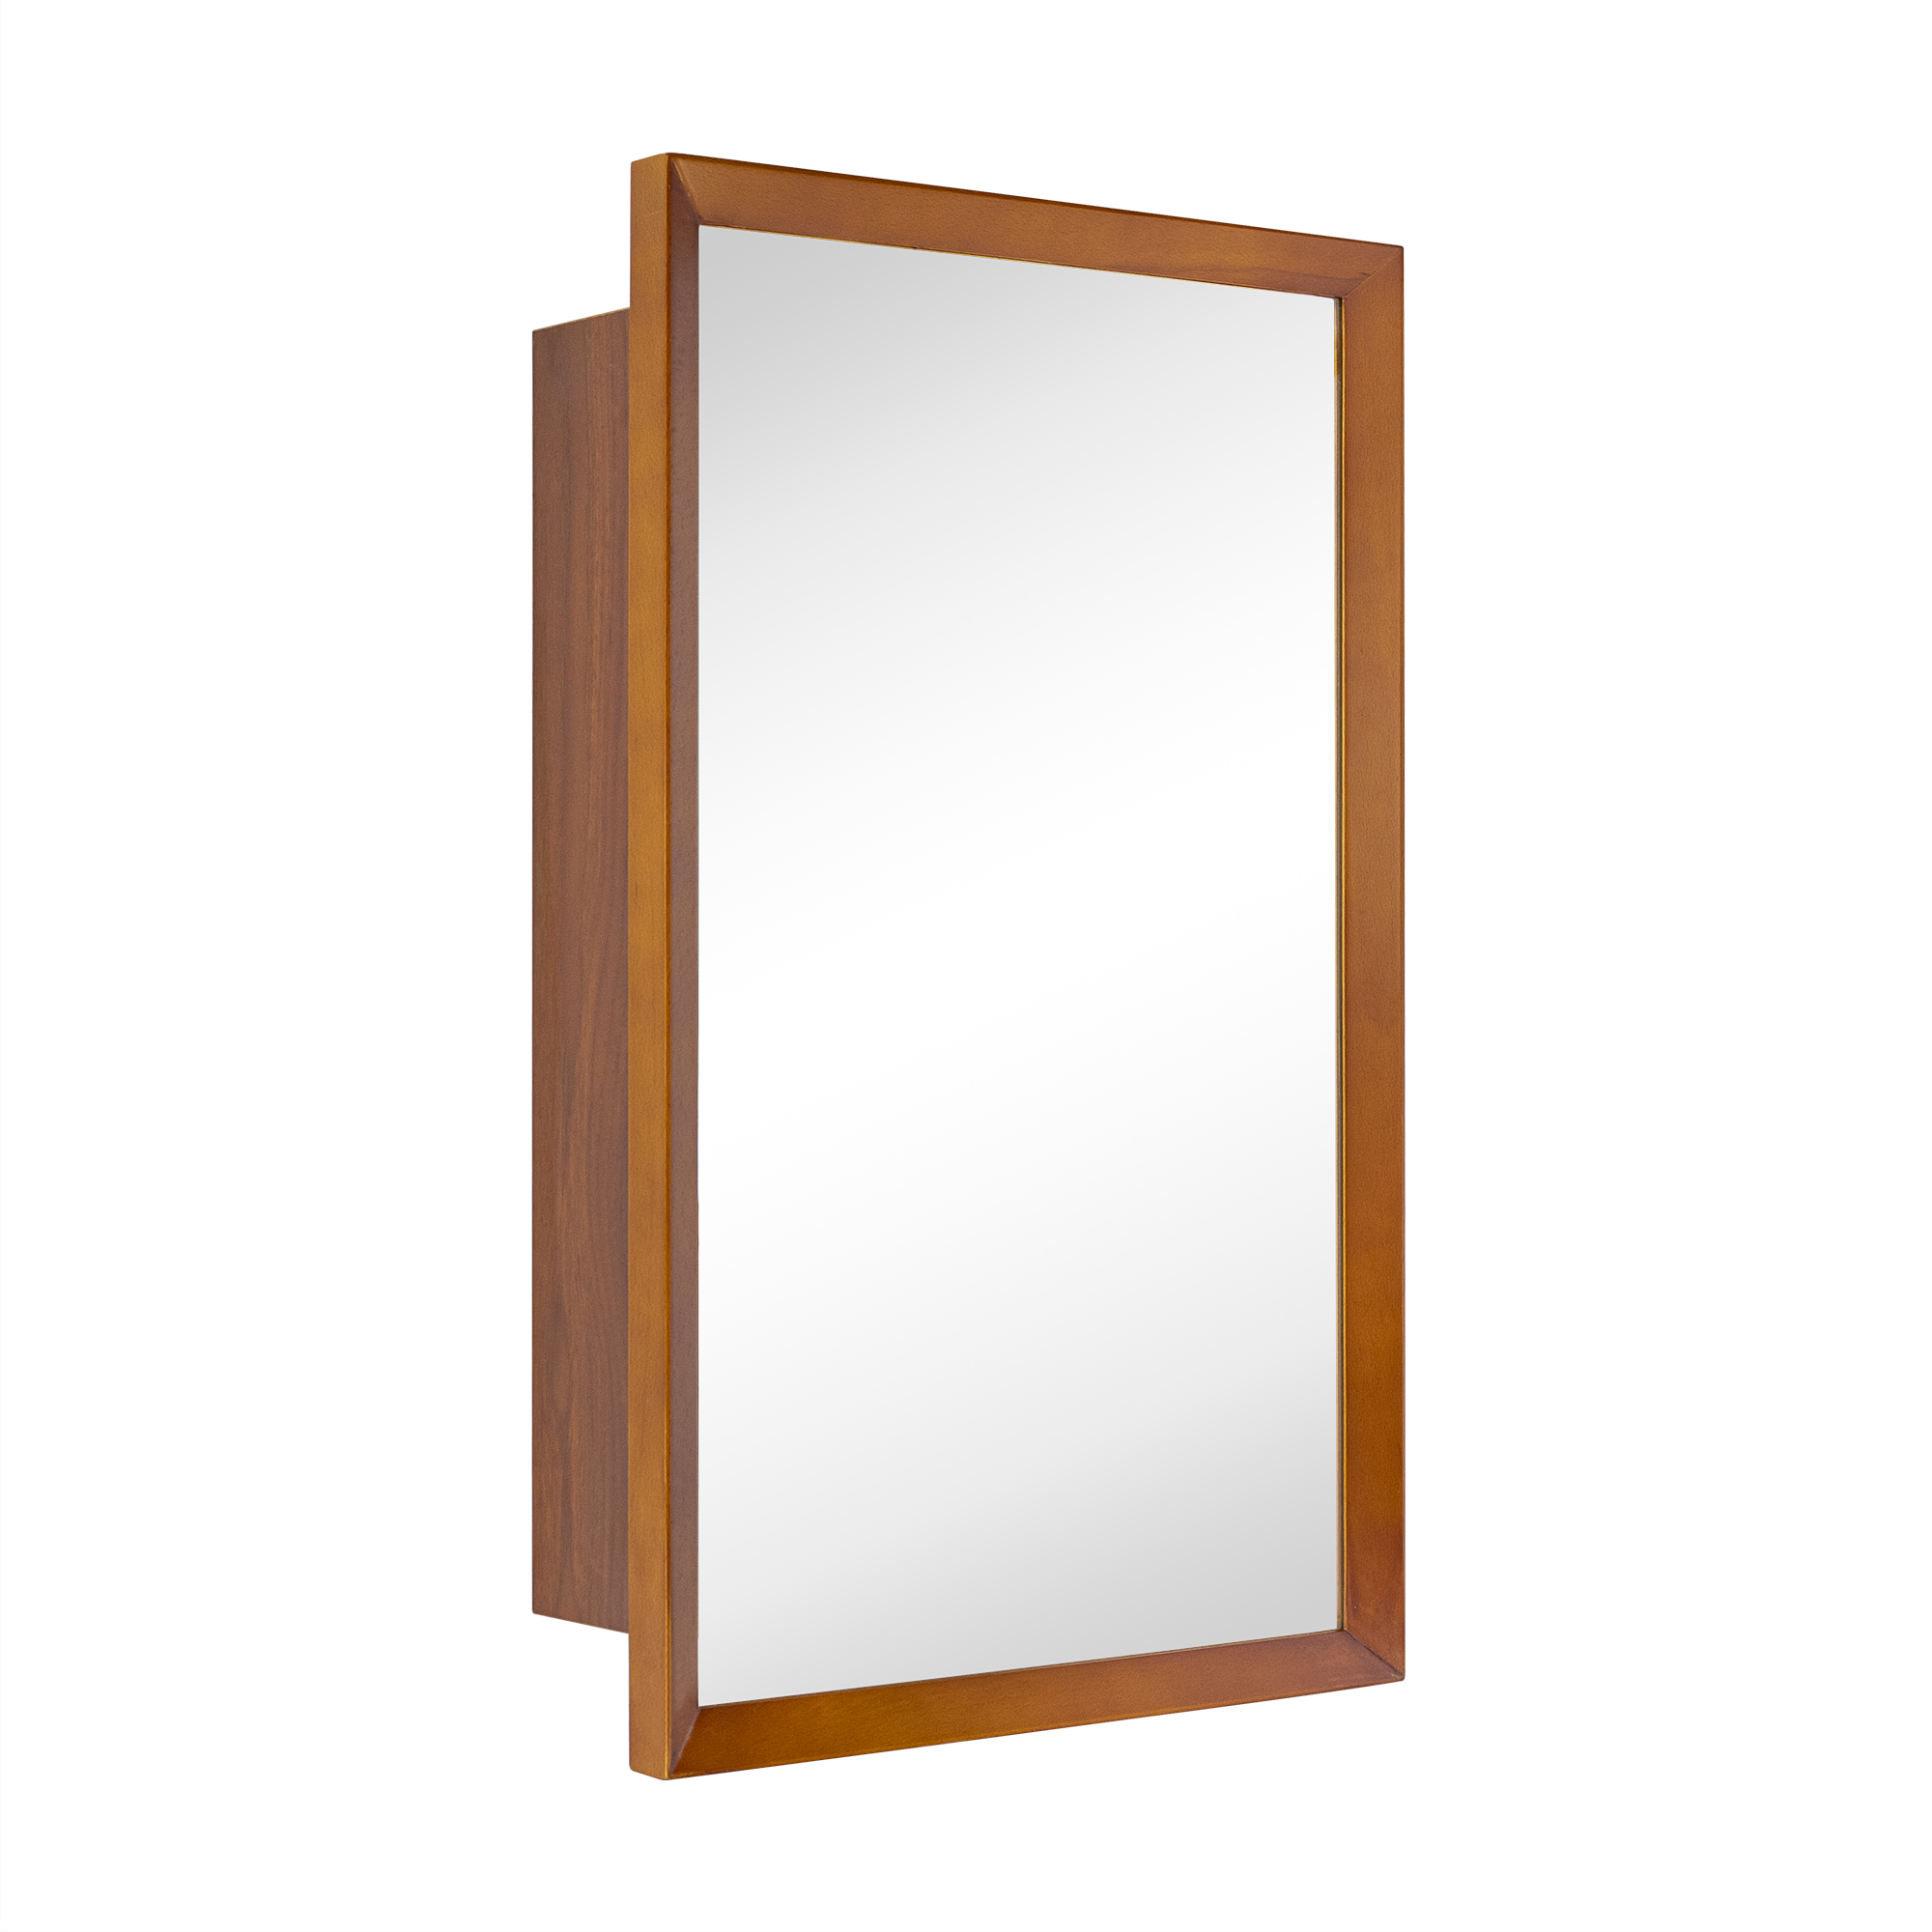 EGHOME Natural Walnut Wood Mirror Solid Wood Framed Rounded Rectangle Bathroom Mirror Walnut Wood Frame Vanity Mirror, 30x48&#39;&#39; Click image to open expanded view  EGHOME Natural Walnut Wood Mirror Solid Wood Framed Rounded Rectangle Bathroom Mirror